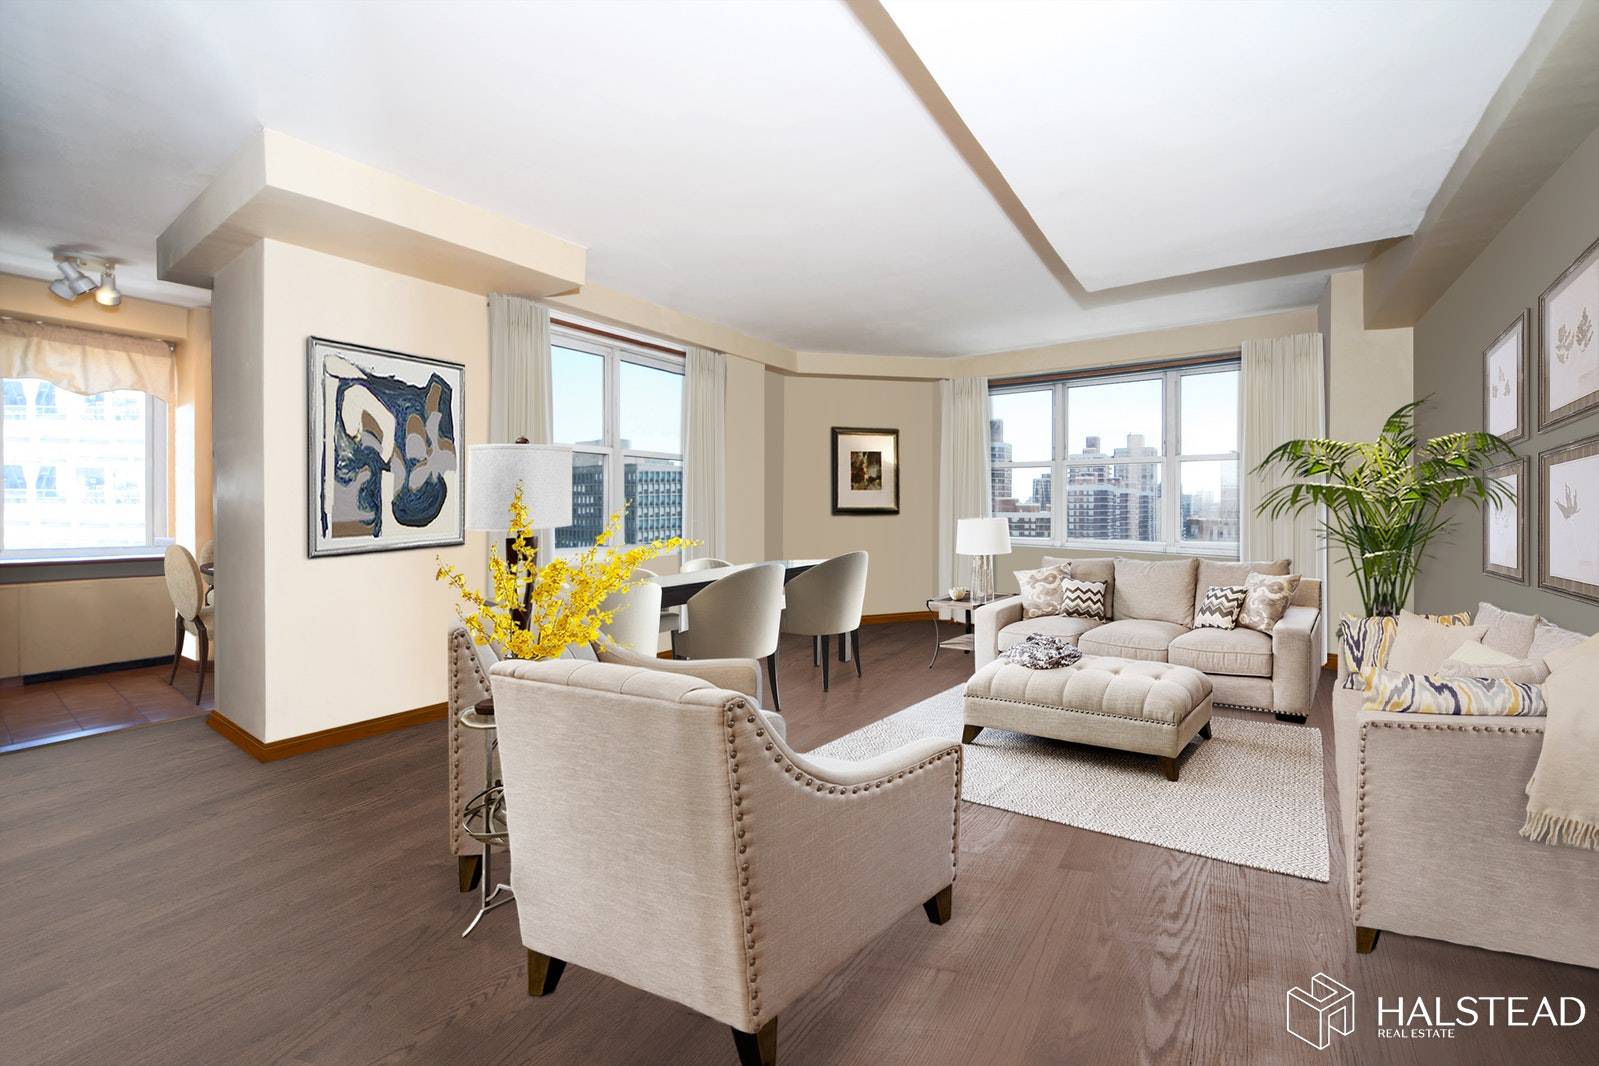 This sunny, spacious true two bedroom boasts a large living and dining area with hardwood floors and fabulous south facing city skyline views.